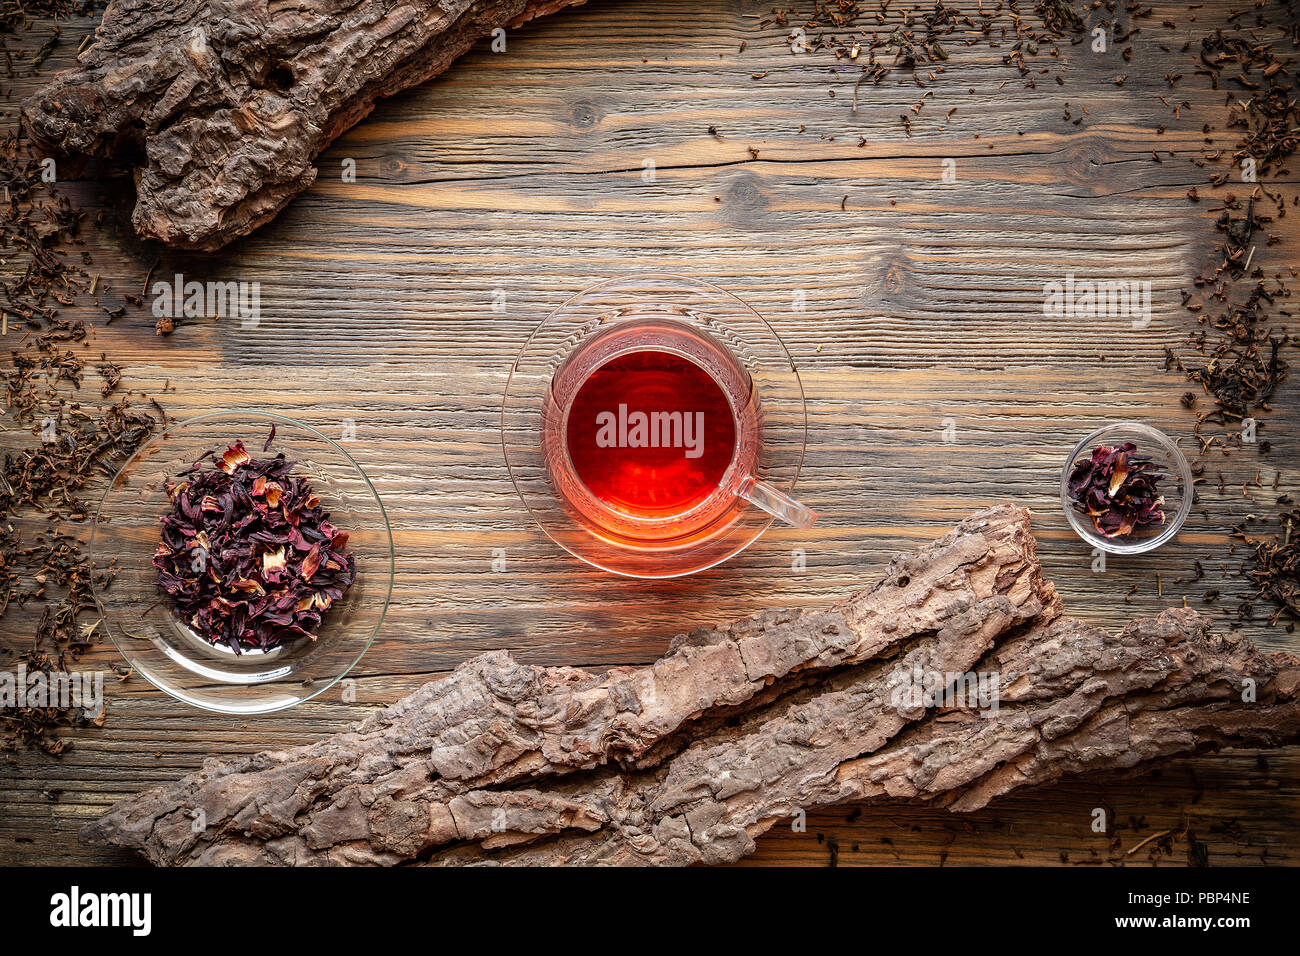 Cup of tea on vintage wooden background, flat lay shot Stock Photo